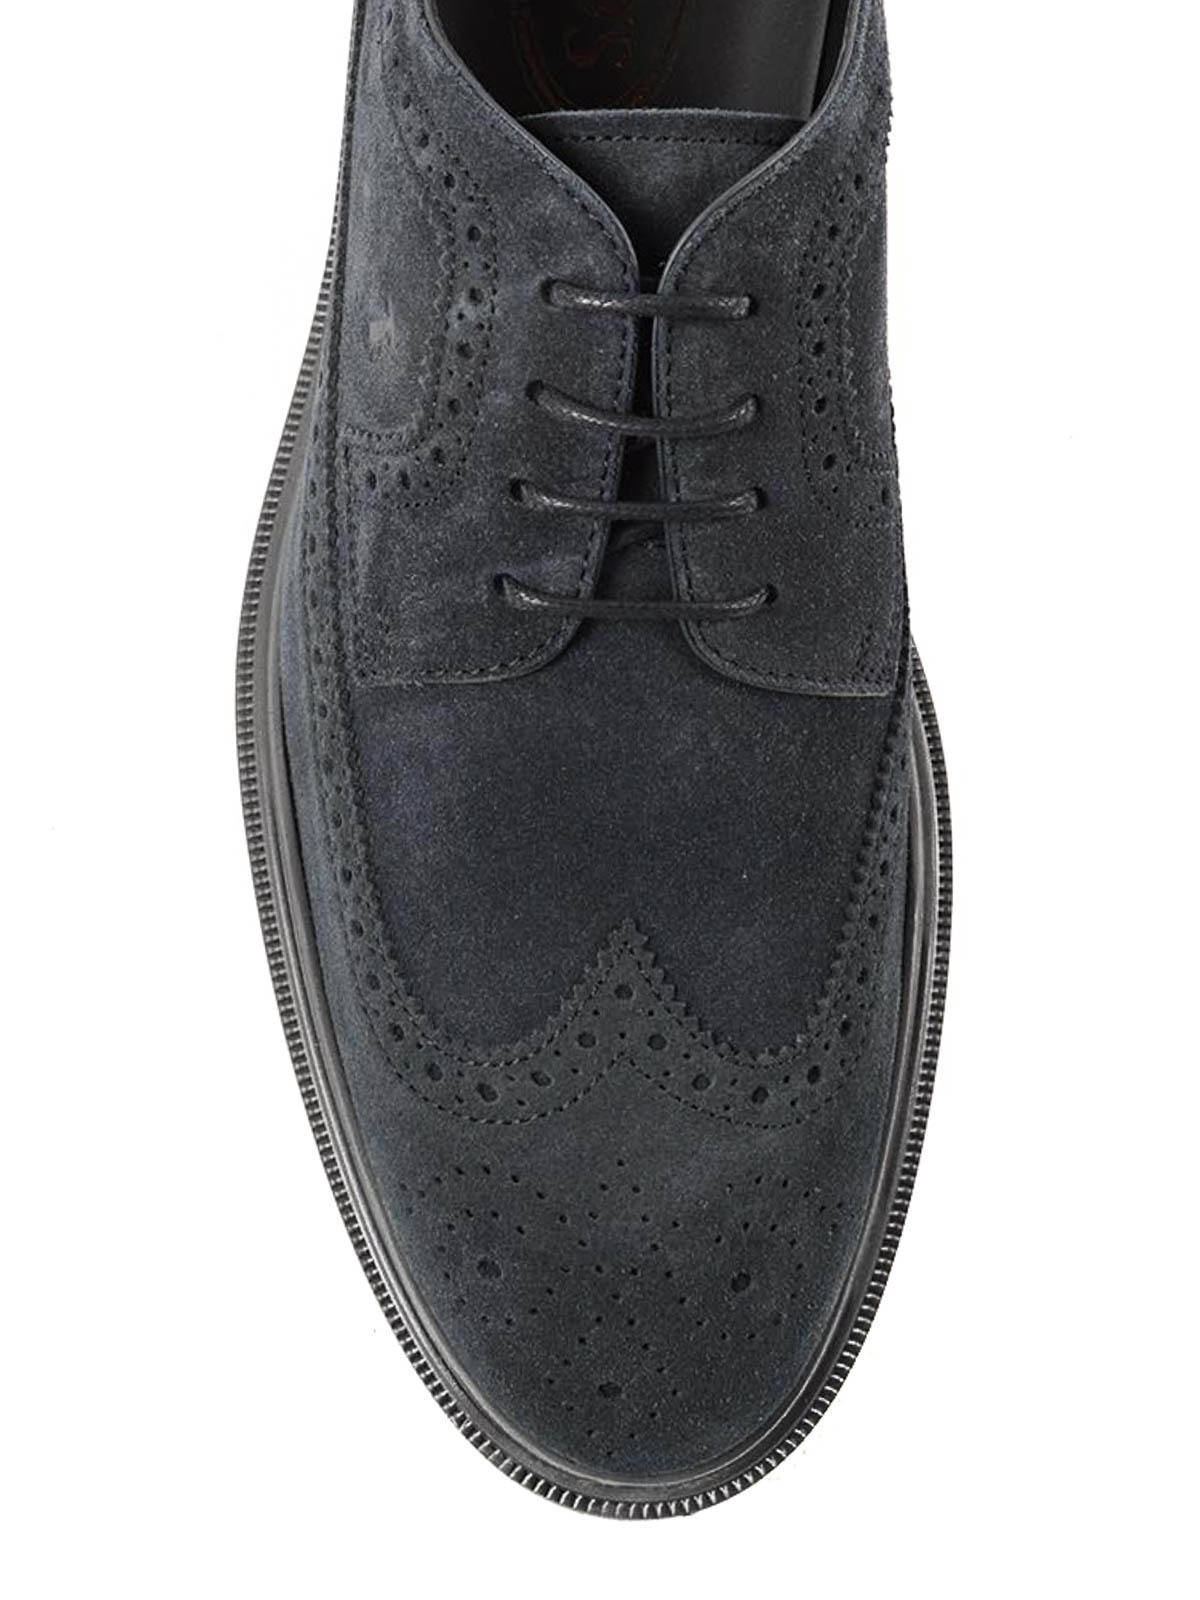 tod's derby shoes